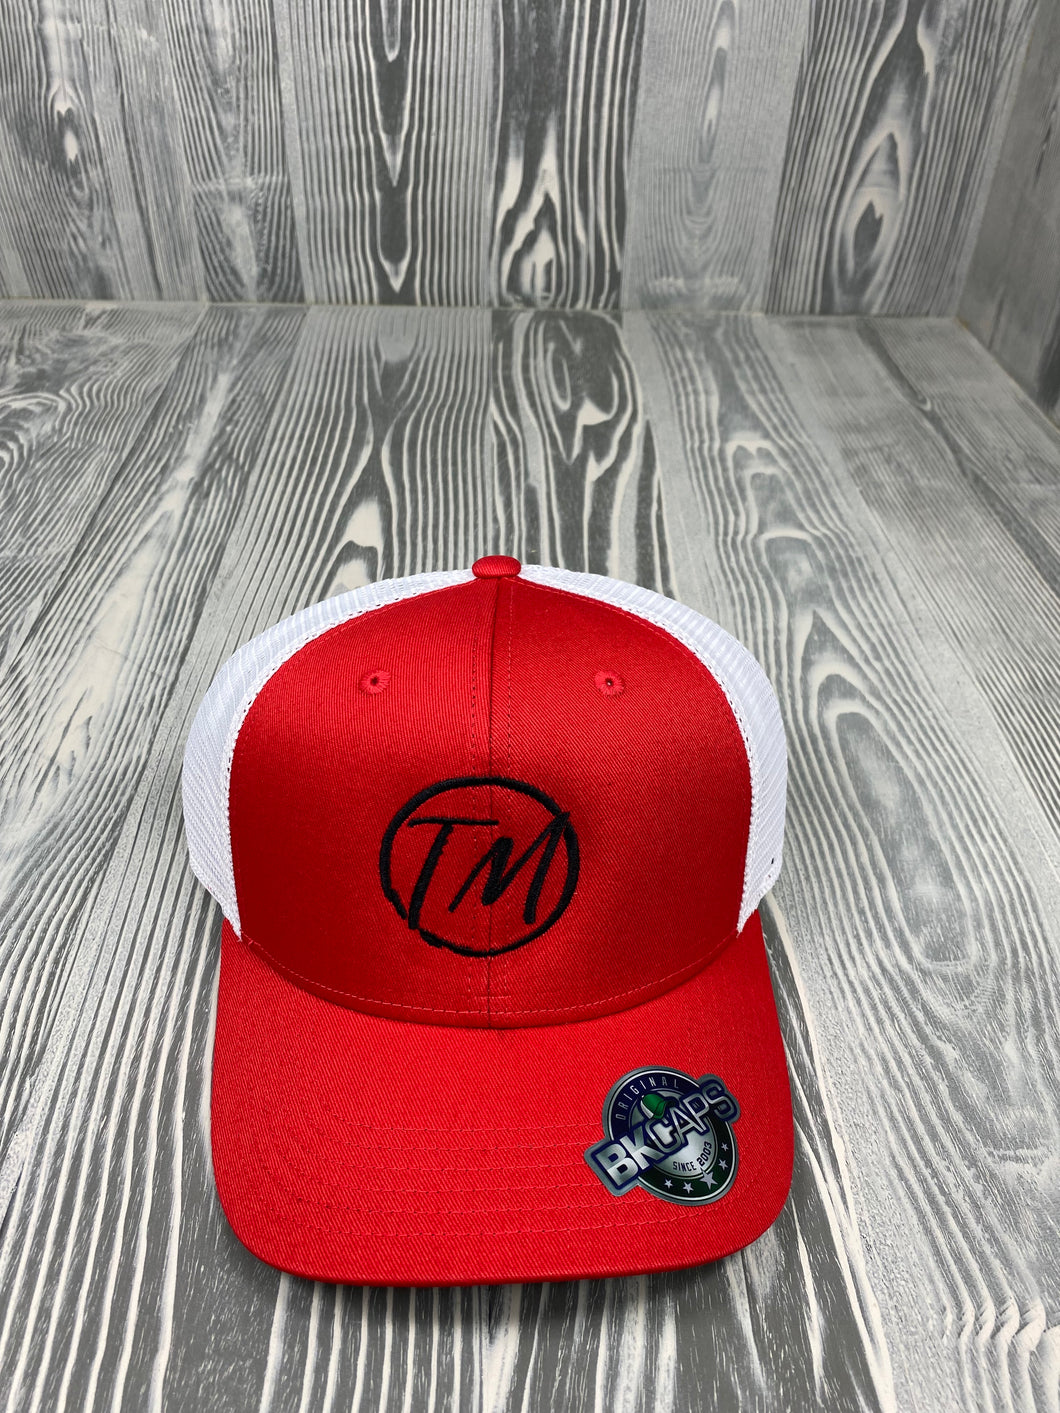 SNAPBACK RED HAT WITH TM LOGO